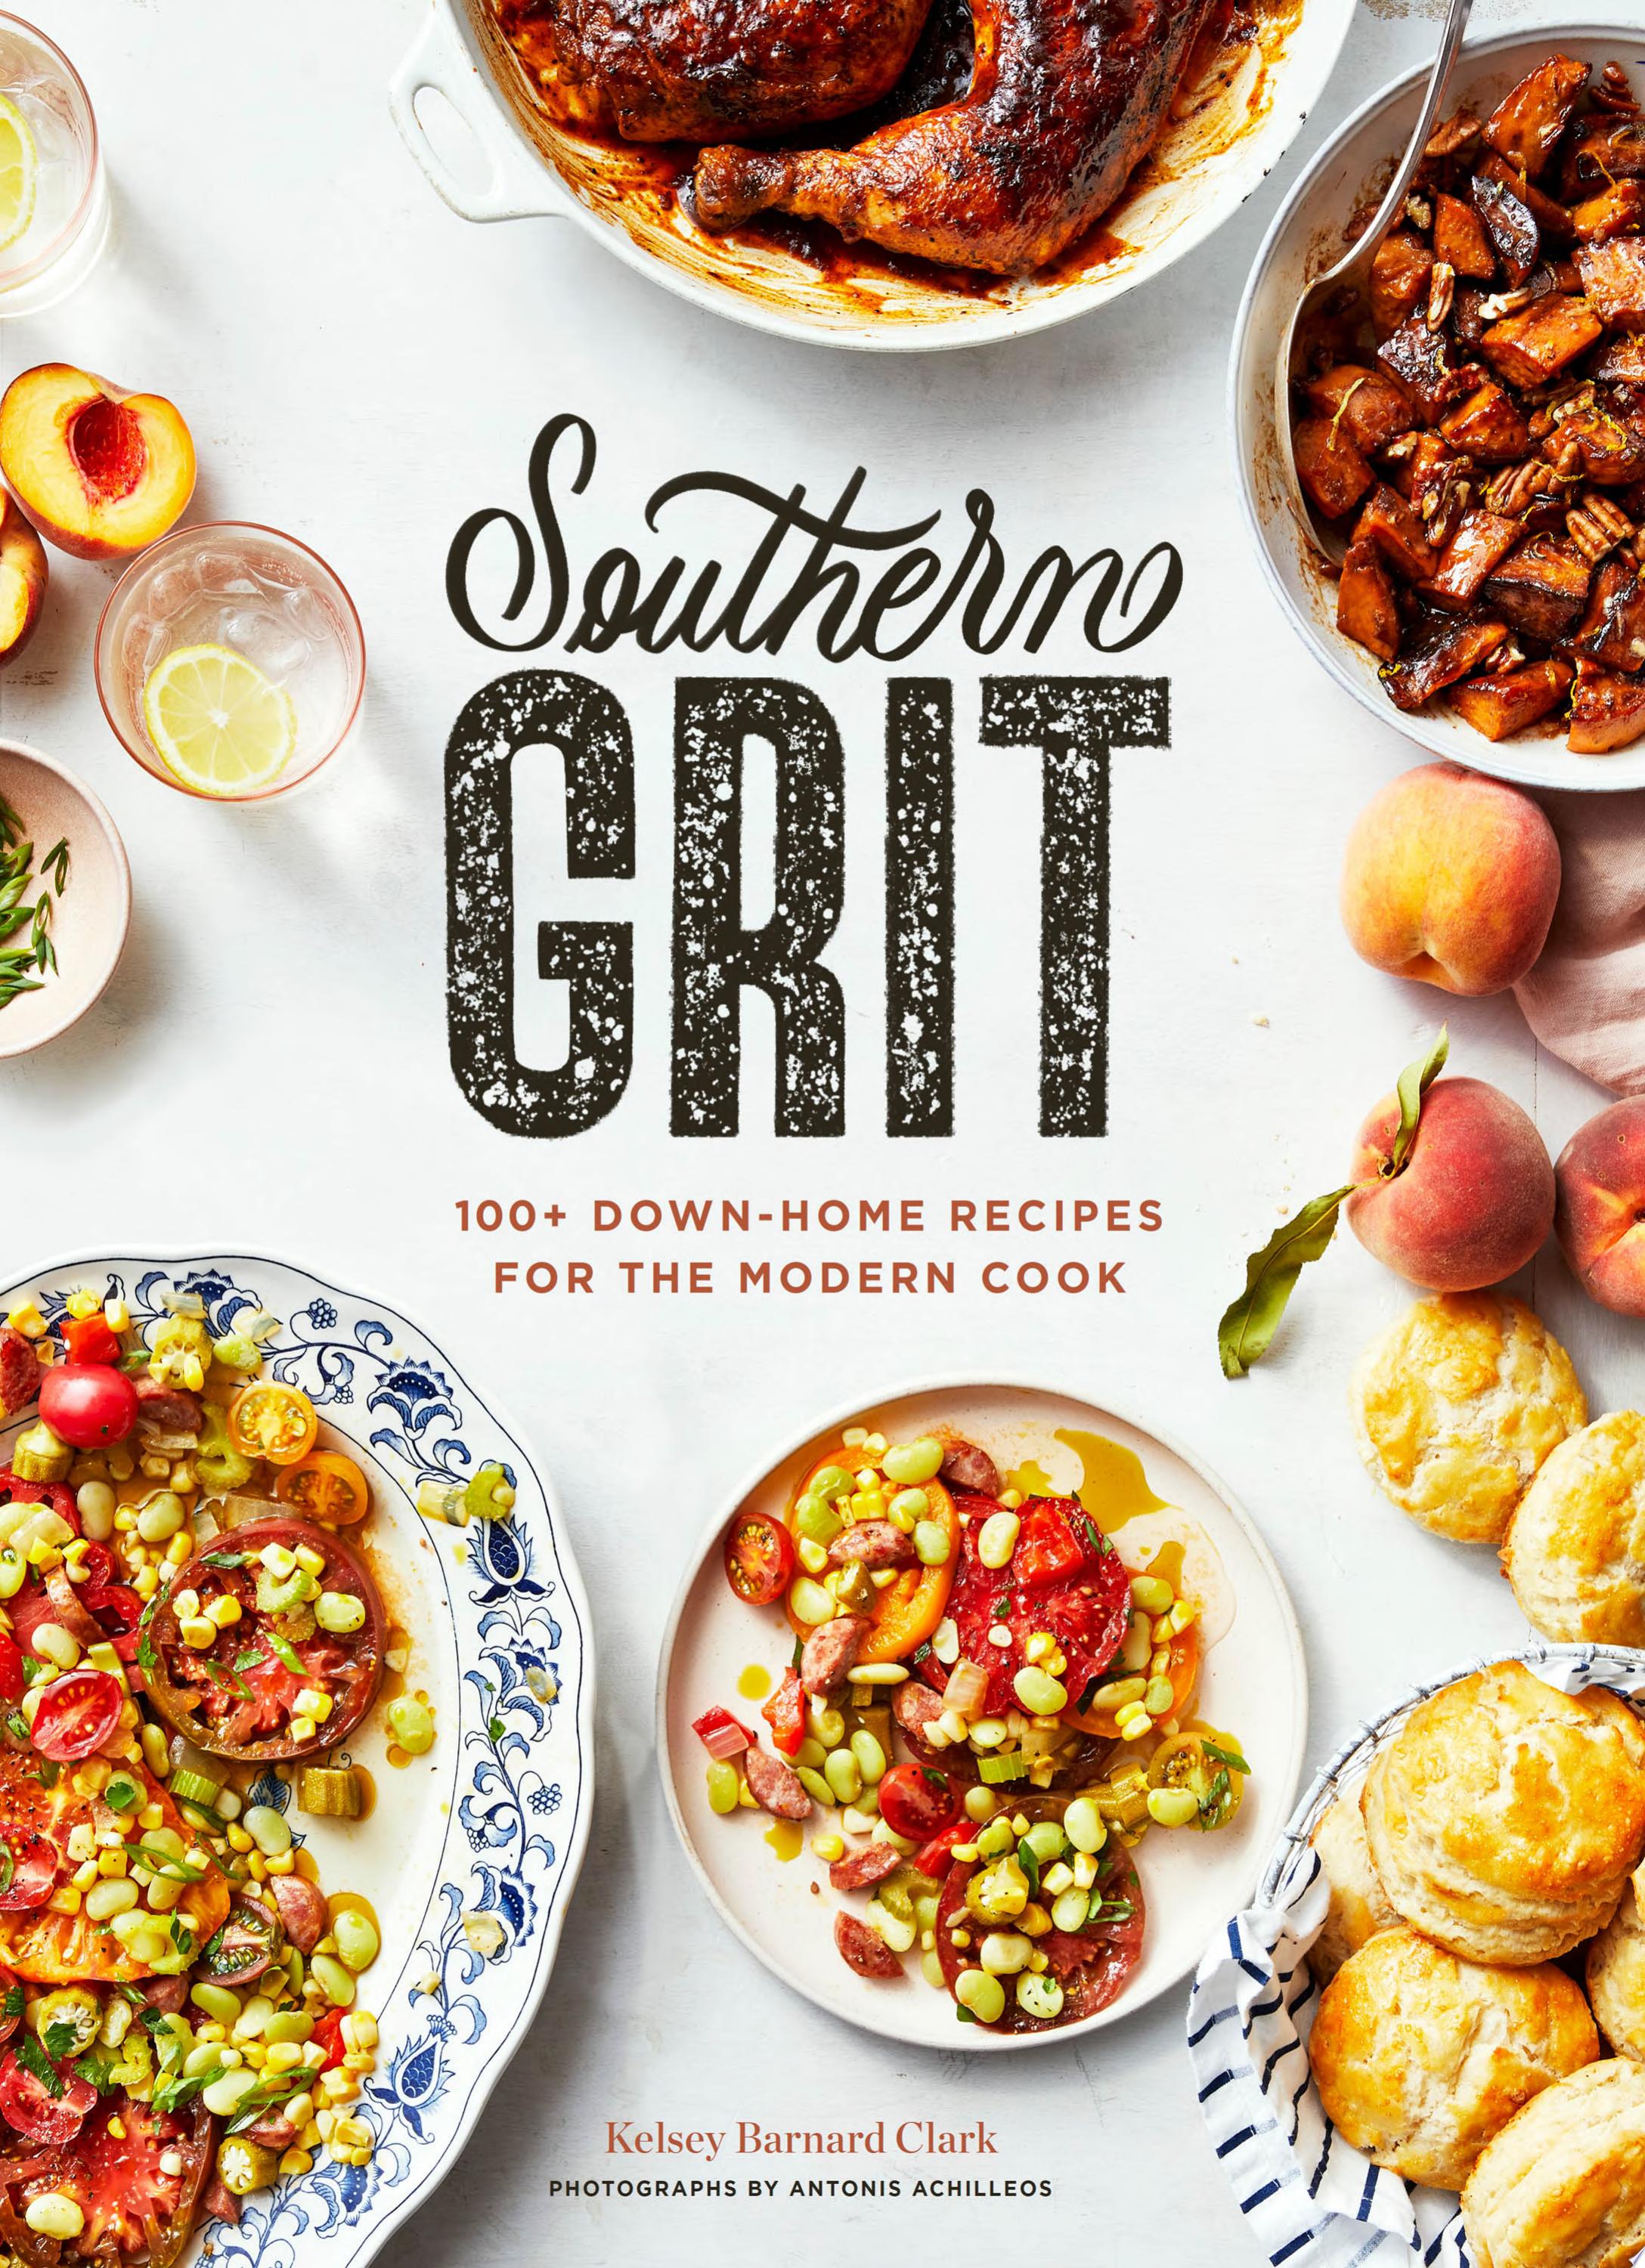 Image for "Southern Grit"